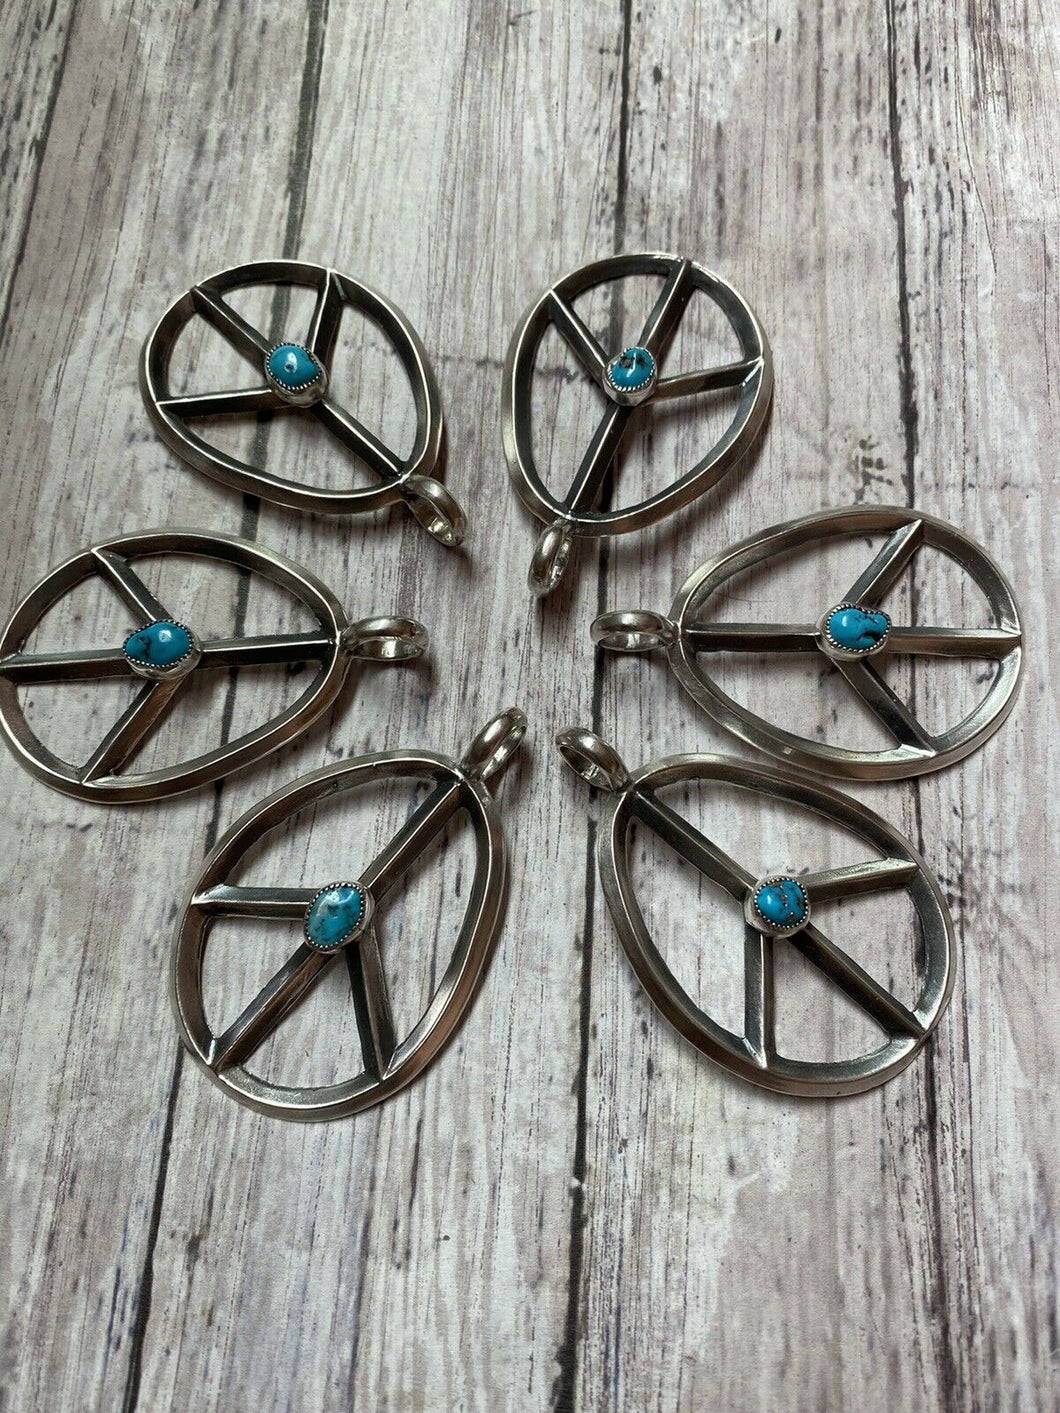 Navajo Sterling Silver & Kingman Turquoise Peace Sign Pendant Signed